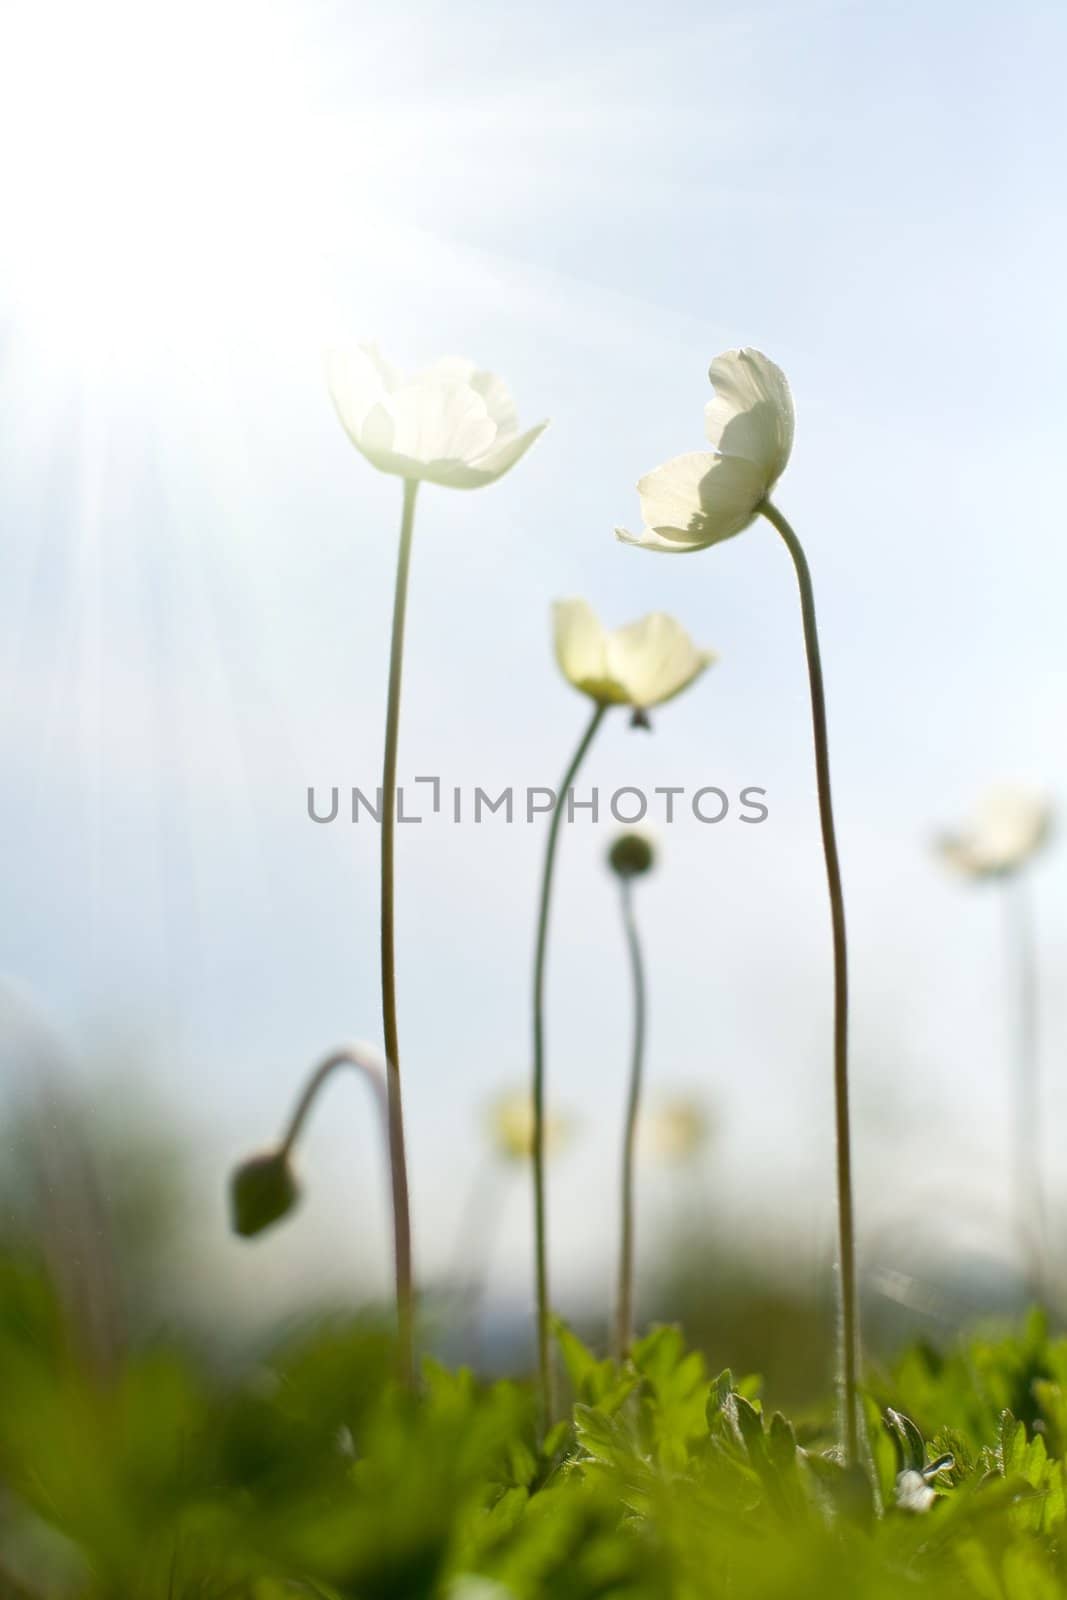 An image of a group of beautiful white flowers